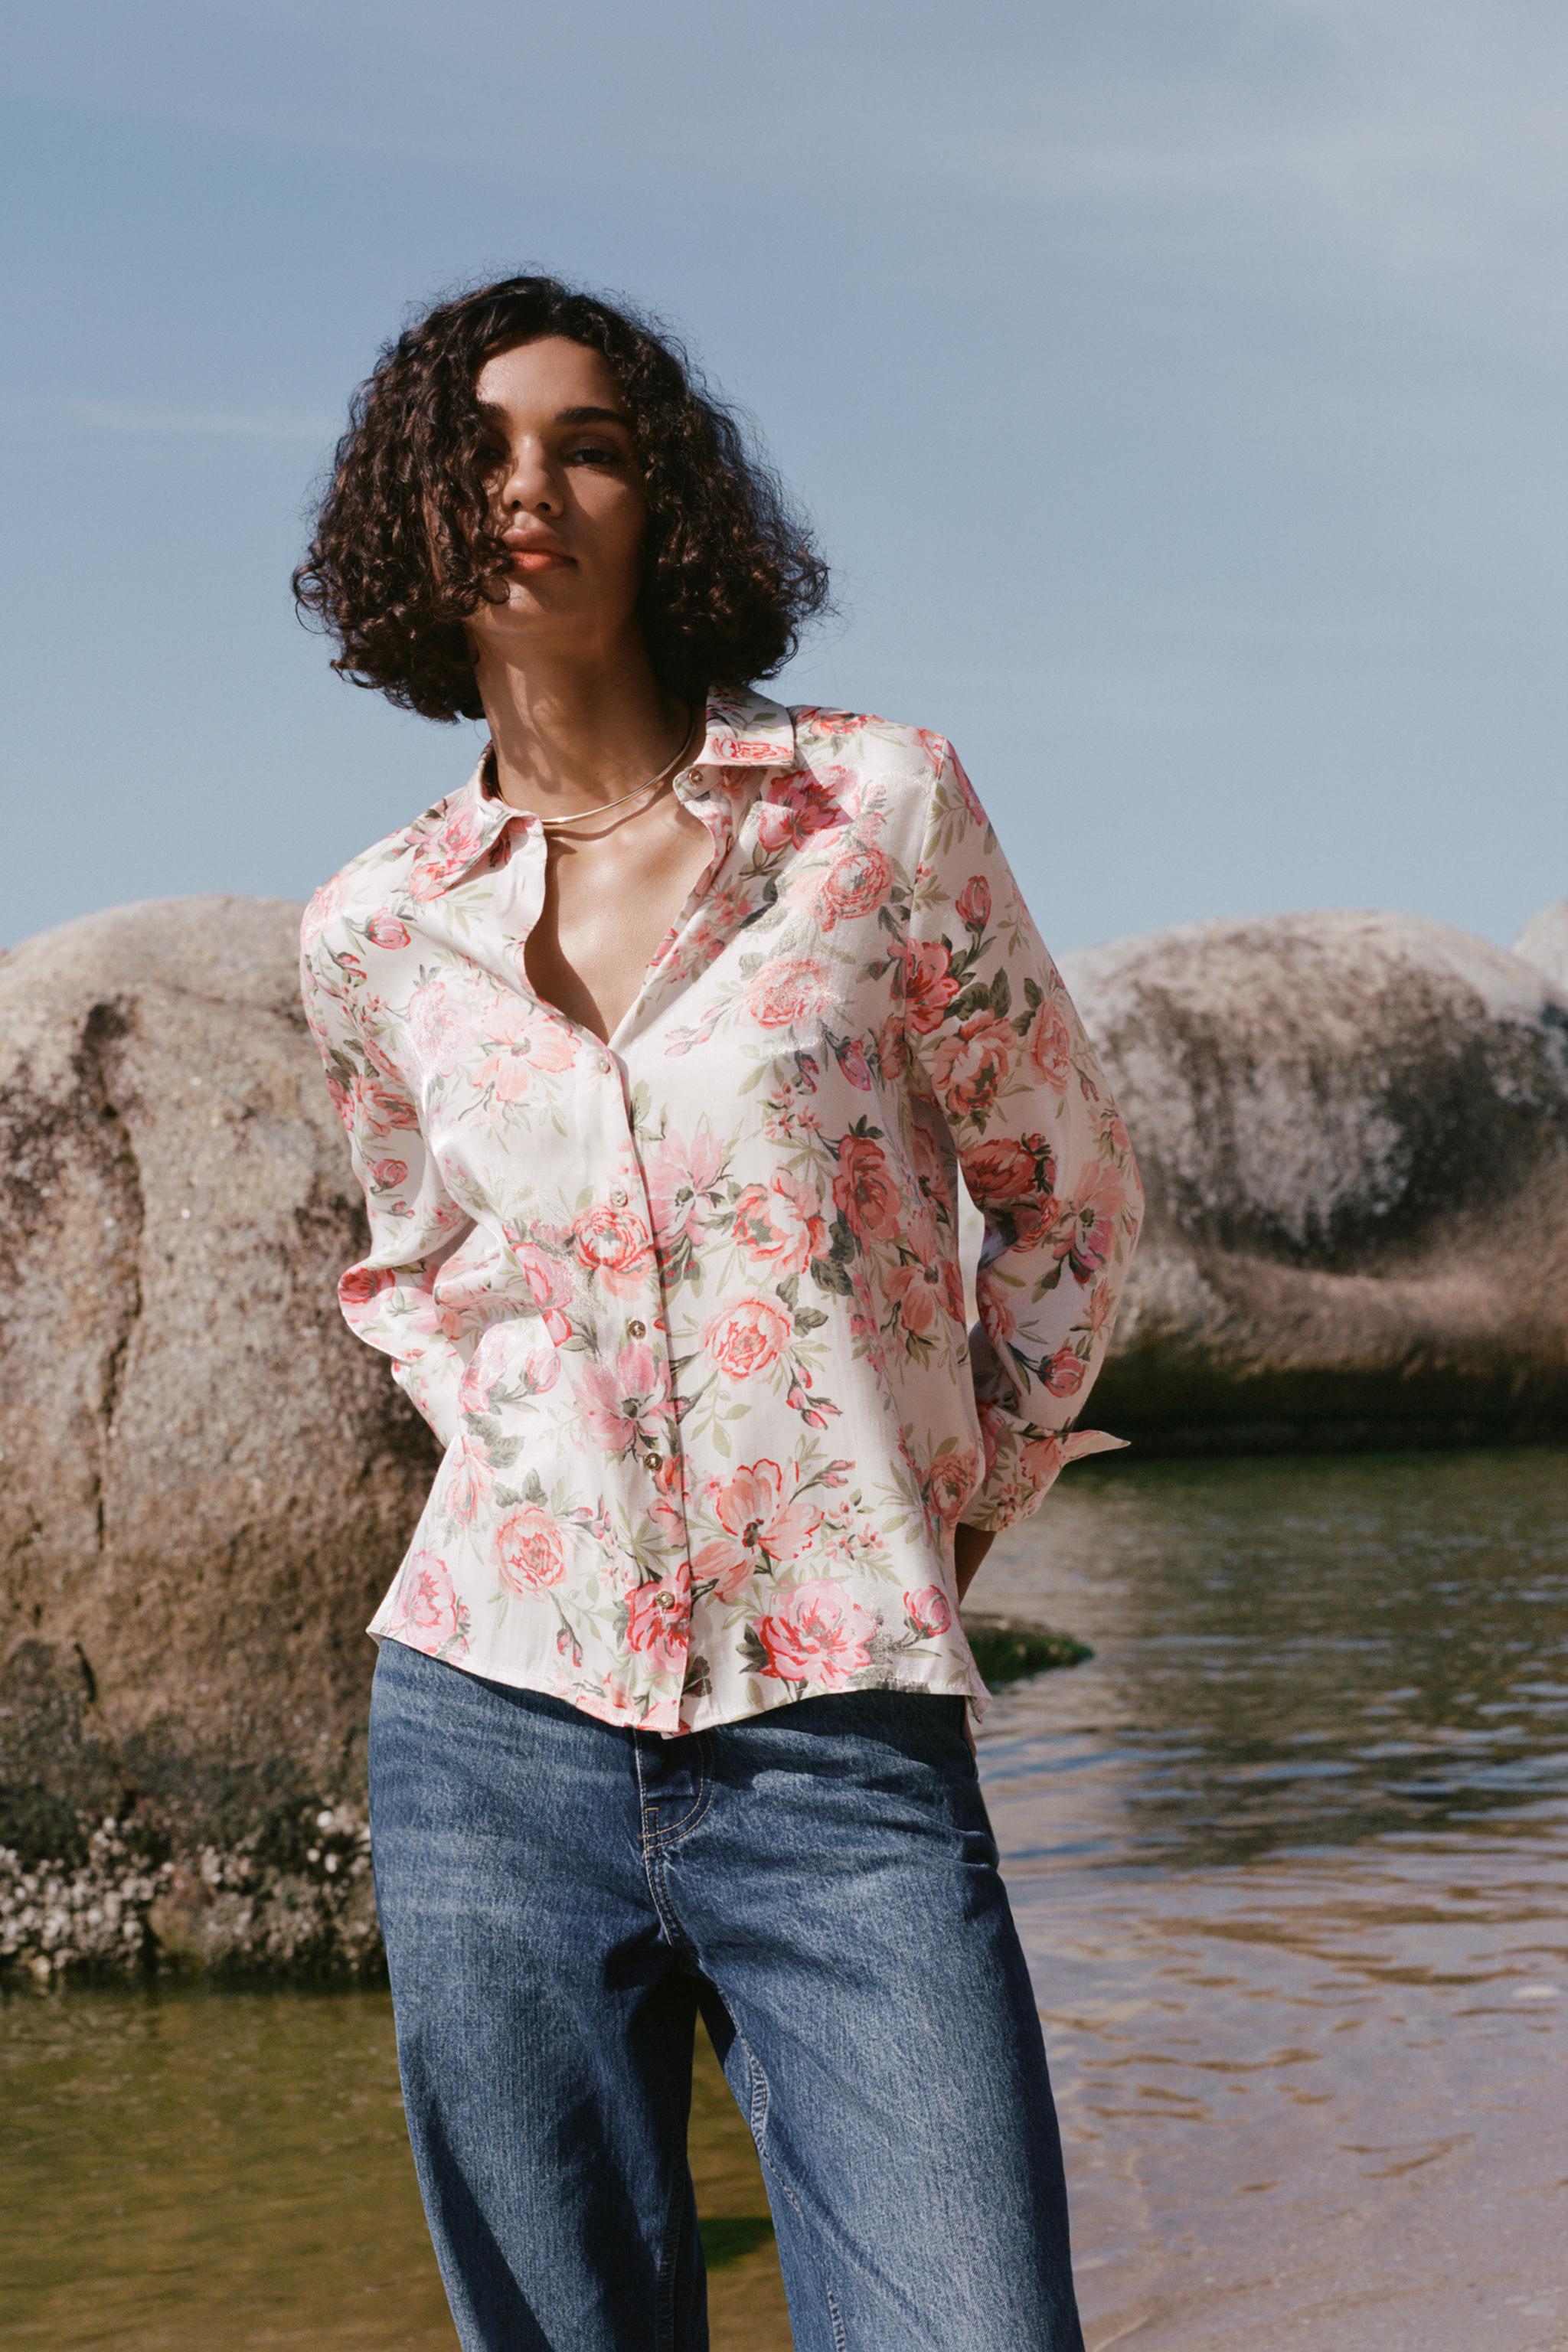 Women's Printed Shirts | Explore our New Arrivals | ZARA United States